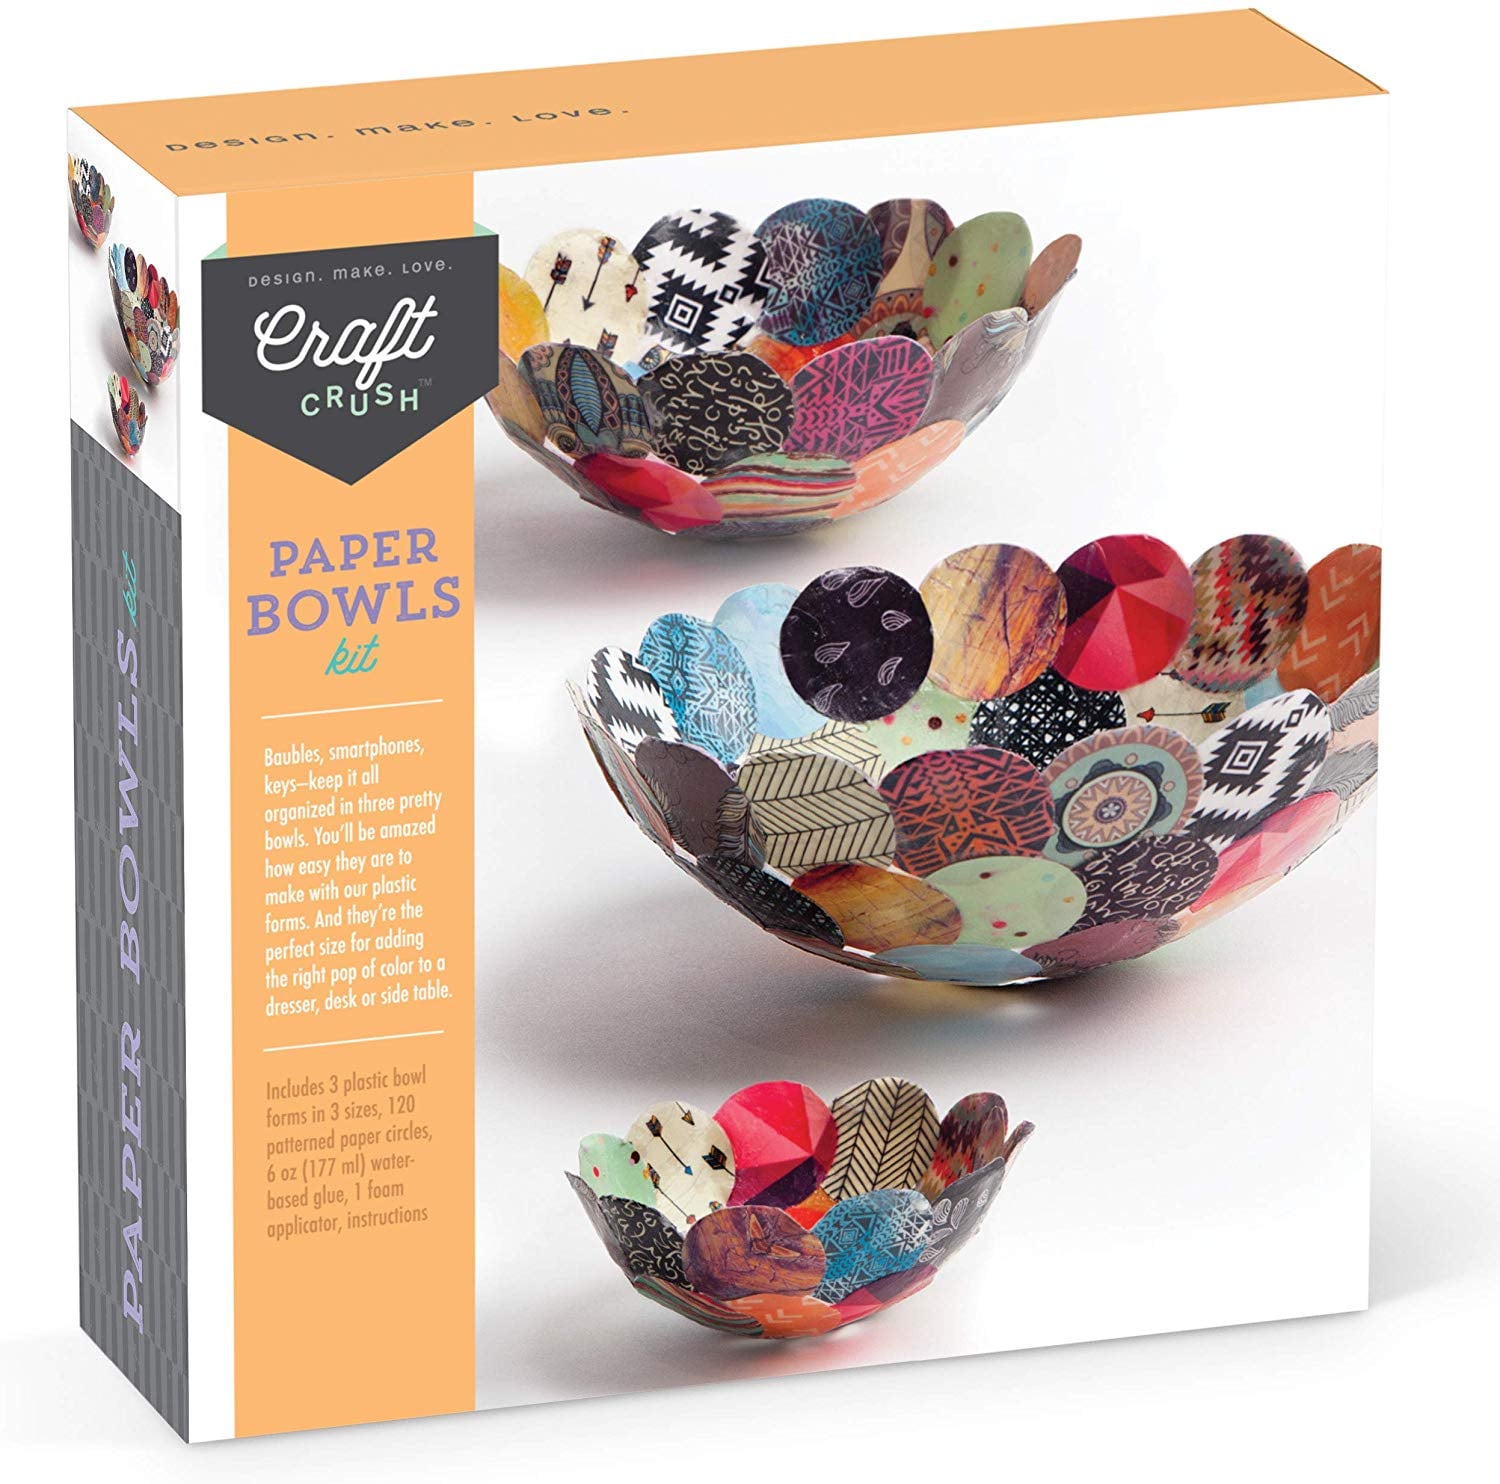 The Best Craft Kits For Adults on